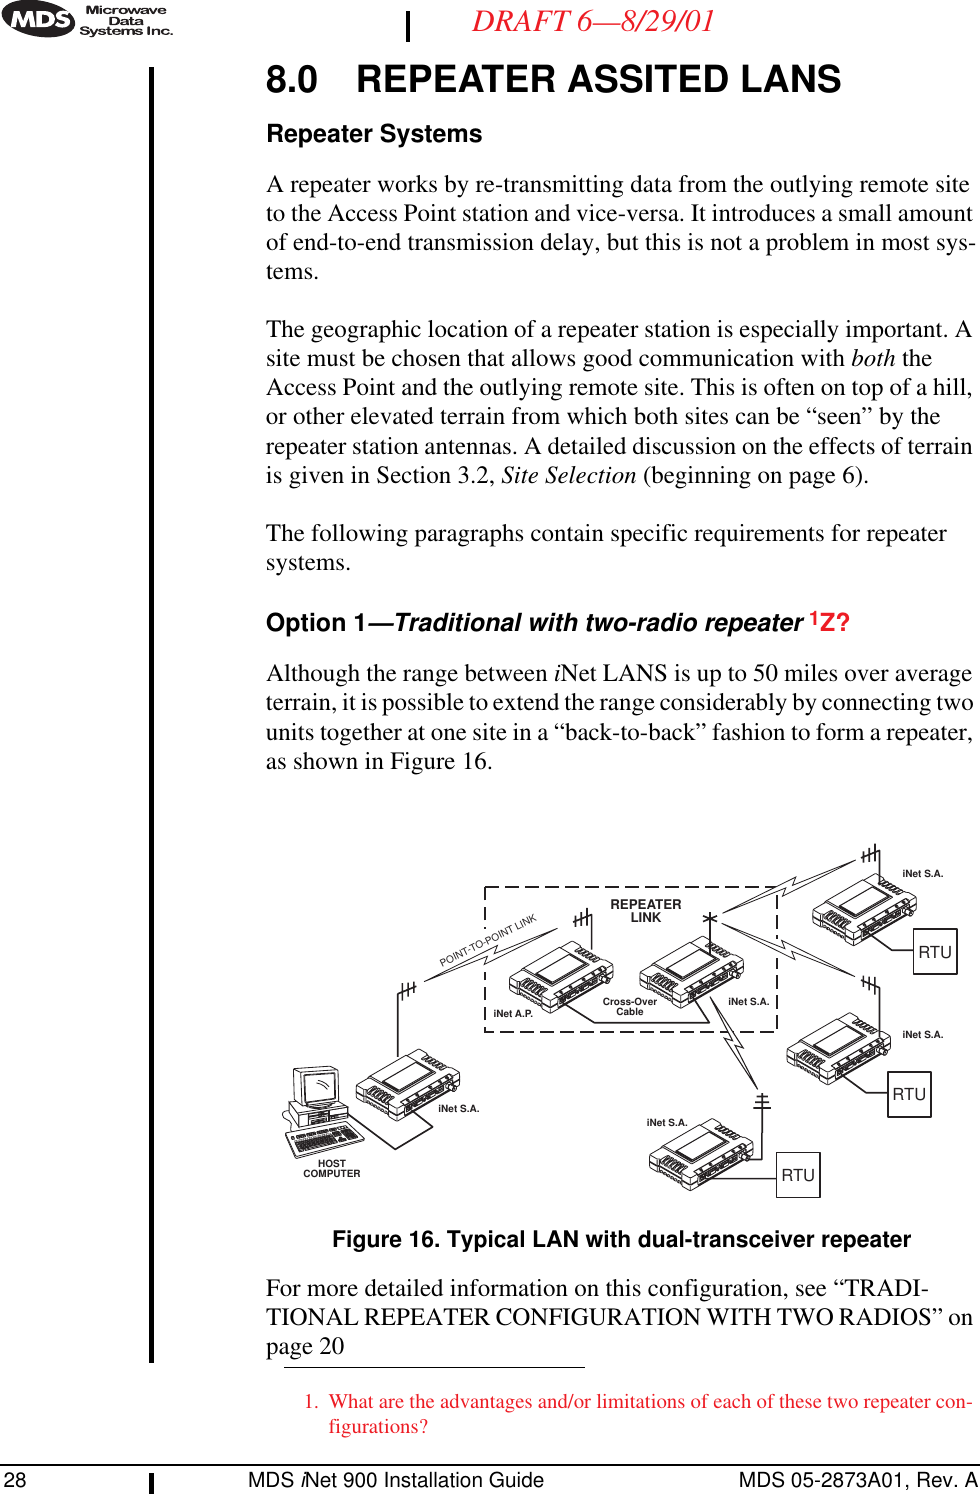 28 MDS iNet 900 Installation Guide MDS 05-2873A01, Rev. ADRAFT 6—8/29/018.0 REPEATER ASSITED LANSRepeater SystemsA repeater works by re-transmitting data from the outlying remote site to the Access Point station and vice-versa. It introduces a small amount of end-to-end transmission delay, but this is not a problem in most sys-tems.The geographic location of a repeater station is especially important. A site must be chosen that allows good communication with both the Access Point and the outlying remote site. This is often on top of a hill, or other elevated terrain from which both sites can be “seen” by the repeater station antennas. A detailed discussion on the effects of terrain is given in Section 3.2, Site Selection (beginning on page 6).The following paragraphs contain specific requirements for repeater systems.Option 1—Traditional with two-radio repeater 1Z?Although the range between iNet LANS is up to 50 miles over average terrain, it is possible to extend the range considerably by connecting two units together at one site in a “back-to-back” fashion to form a repeater, as shown in Figure 16.Invisible place holderFigure 16. Typical LAN with dual-transceiver repeaterFor more detailed information on this configuration, see “TRADI-TIONAL REPEATER CONFIGURATION WITH TWO RADIOS” on page 201. What are the advantages and/or limitations of each of these two repeater con-figurations?iNet S.A.iNet A.P. iNet S.A.iNet S.A.iNet S.A.iNet S.A.RTUHOSTCOMPUTERRTURTUREPEATERLINKCross-OverCablePOINT-TO-POINT LINK